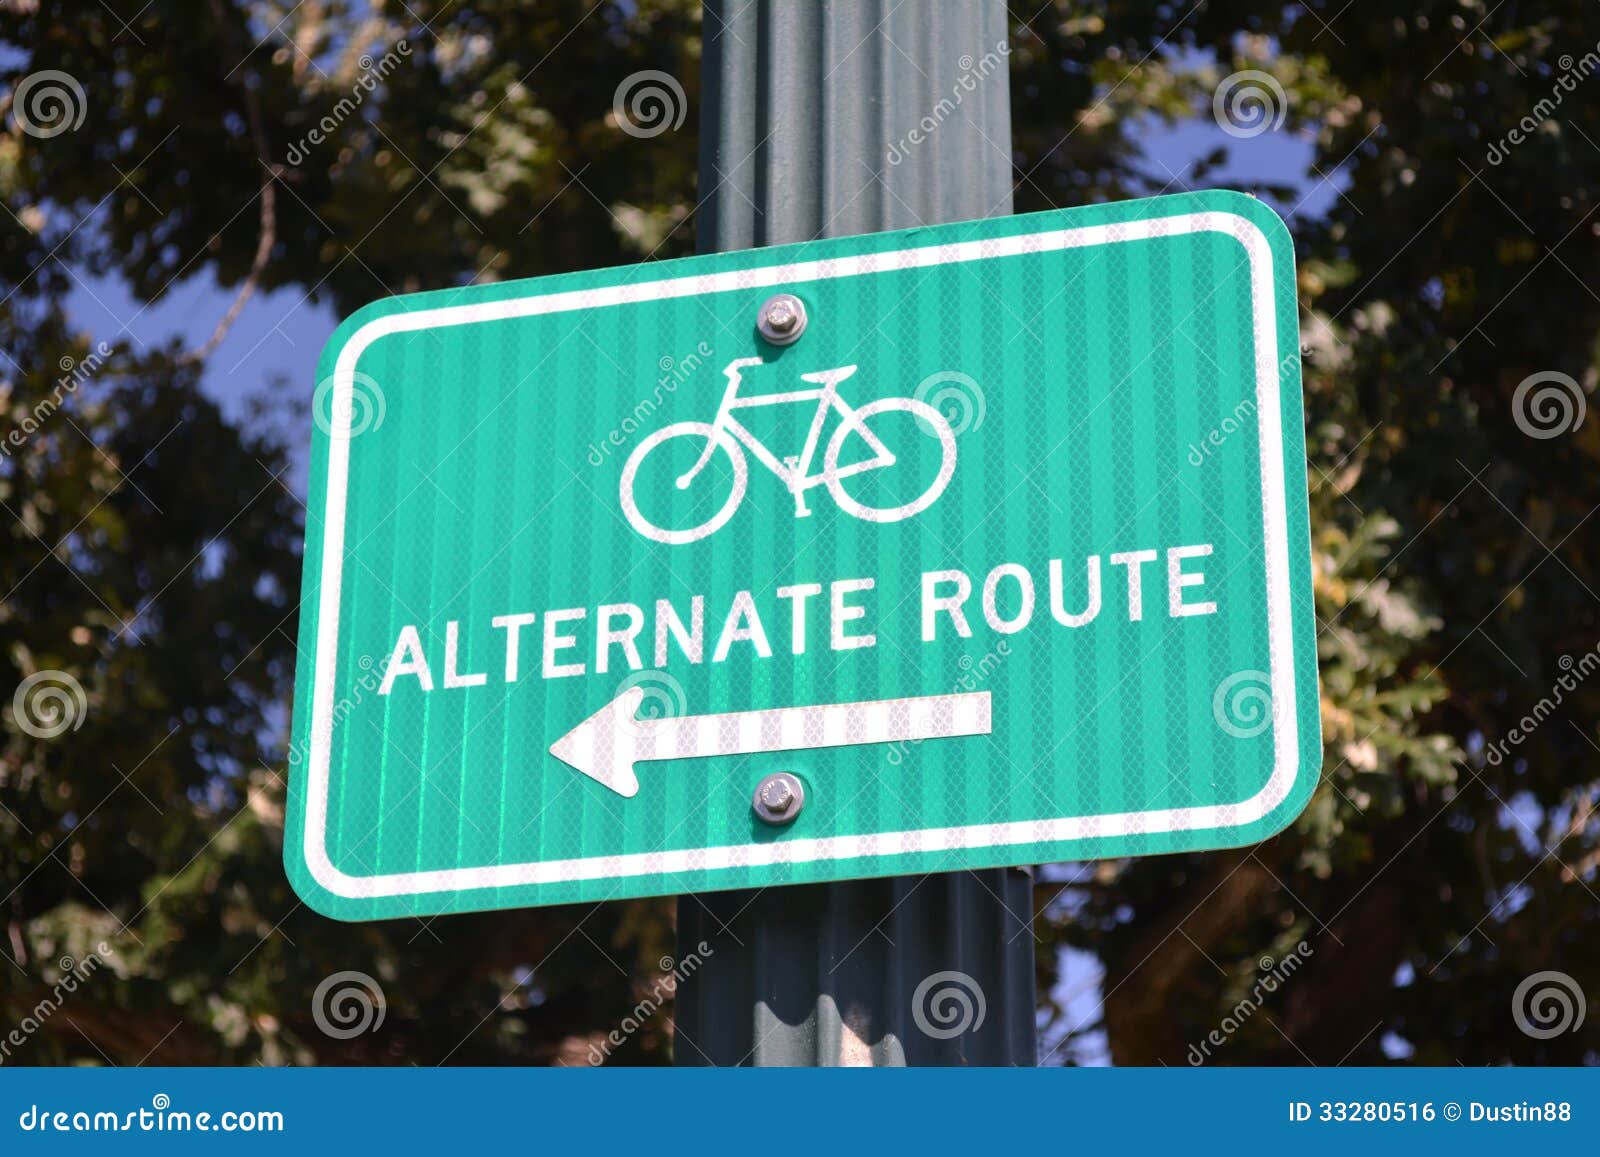 bicycle alternate route